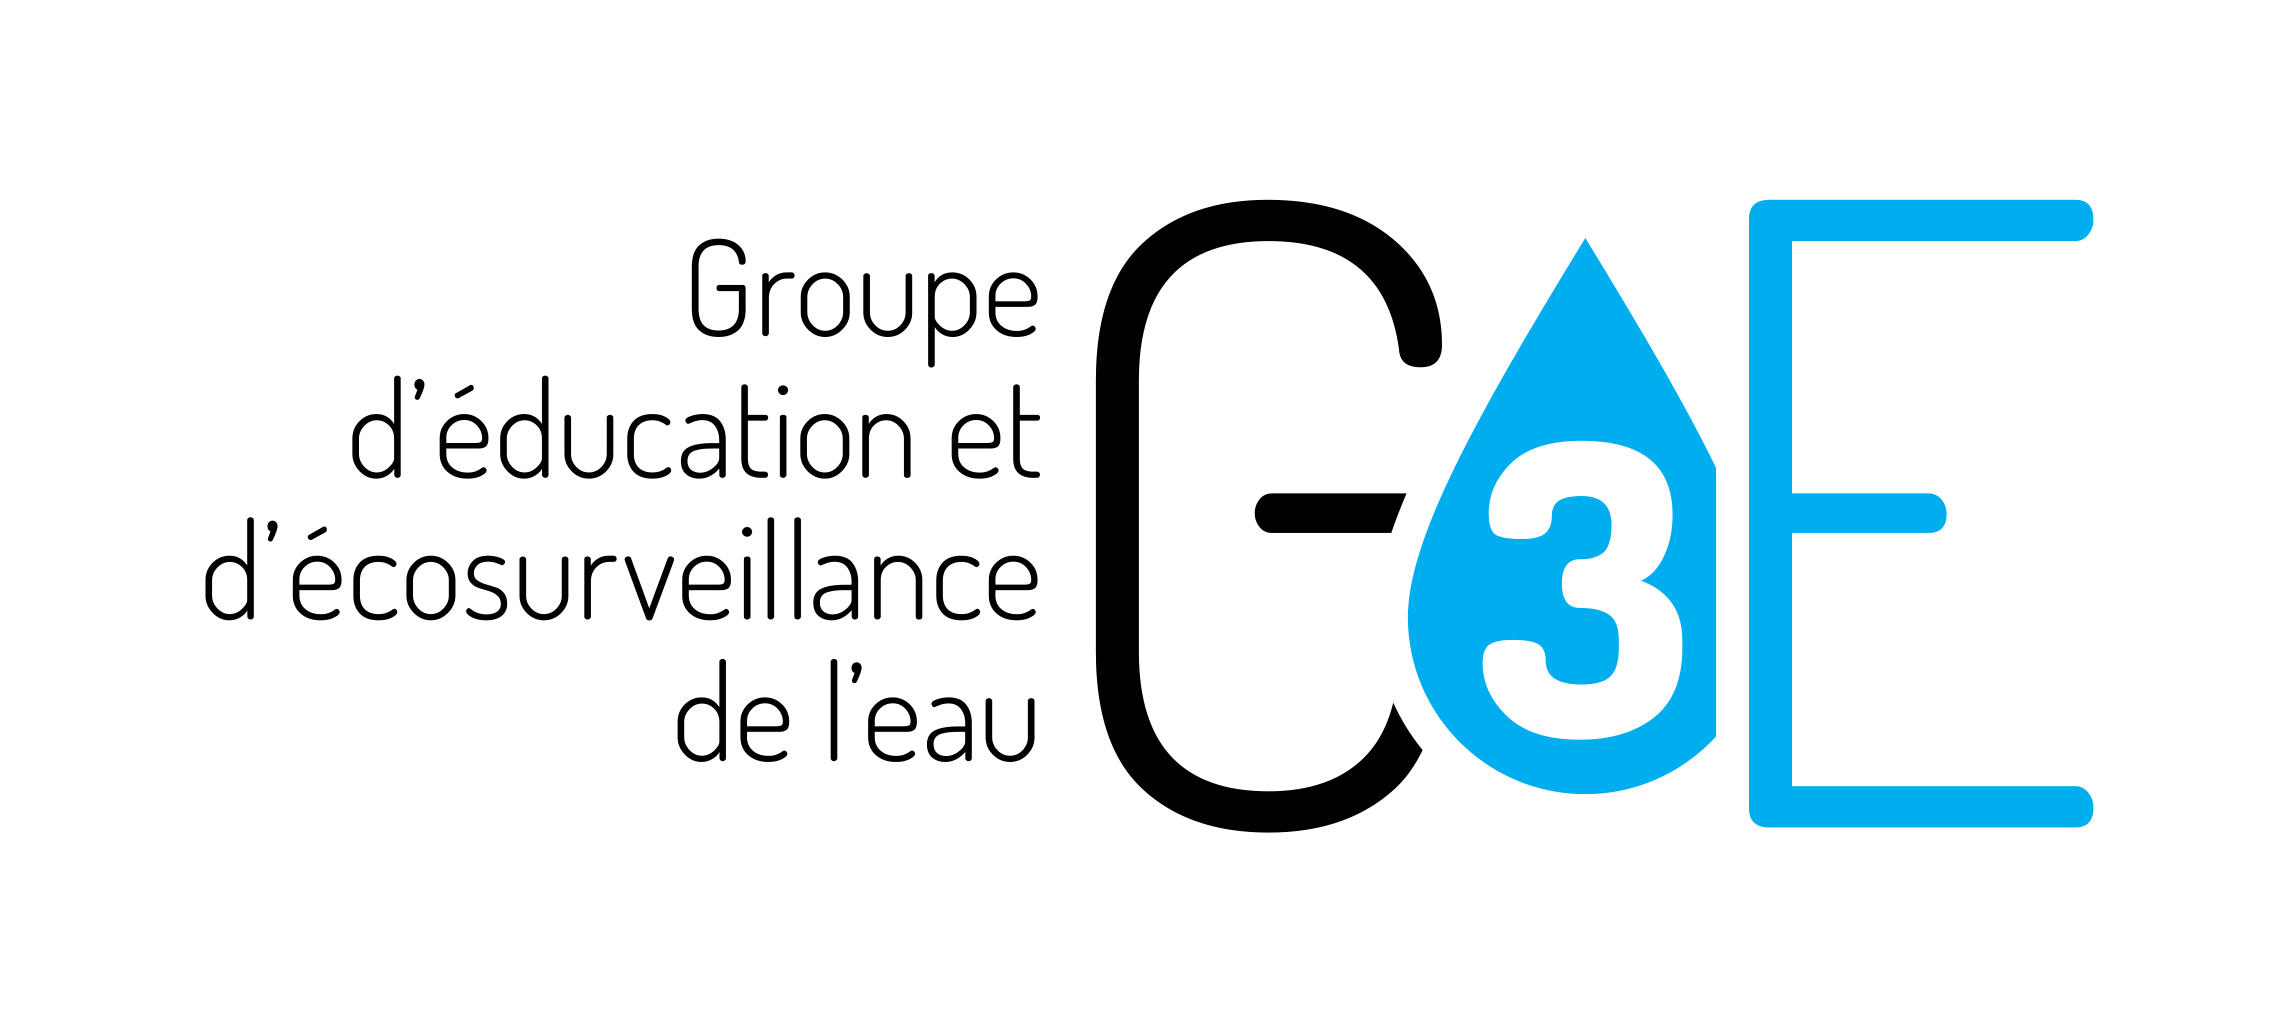 Education and Water Monitoring Action Group (G3E) logo